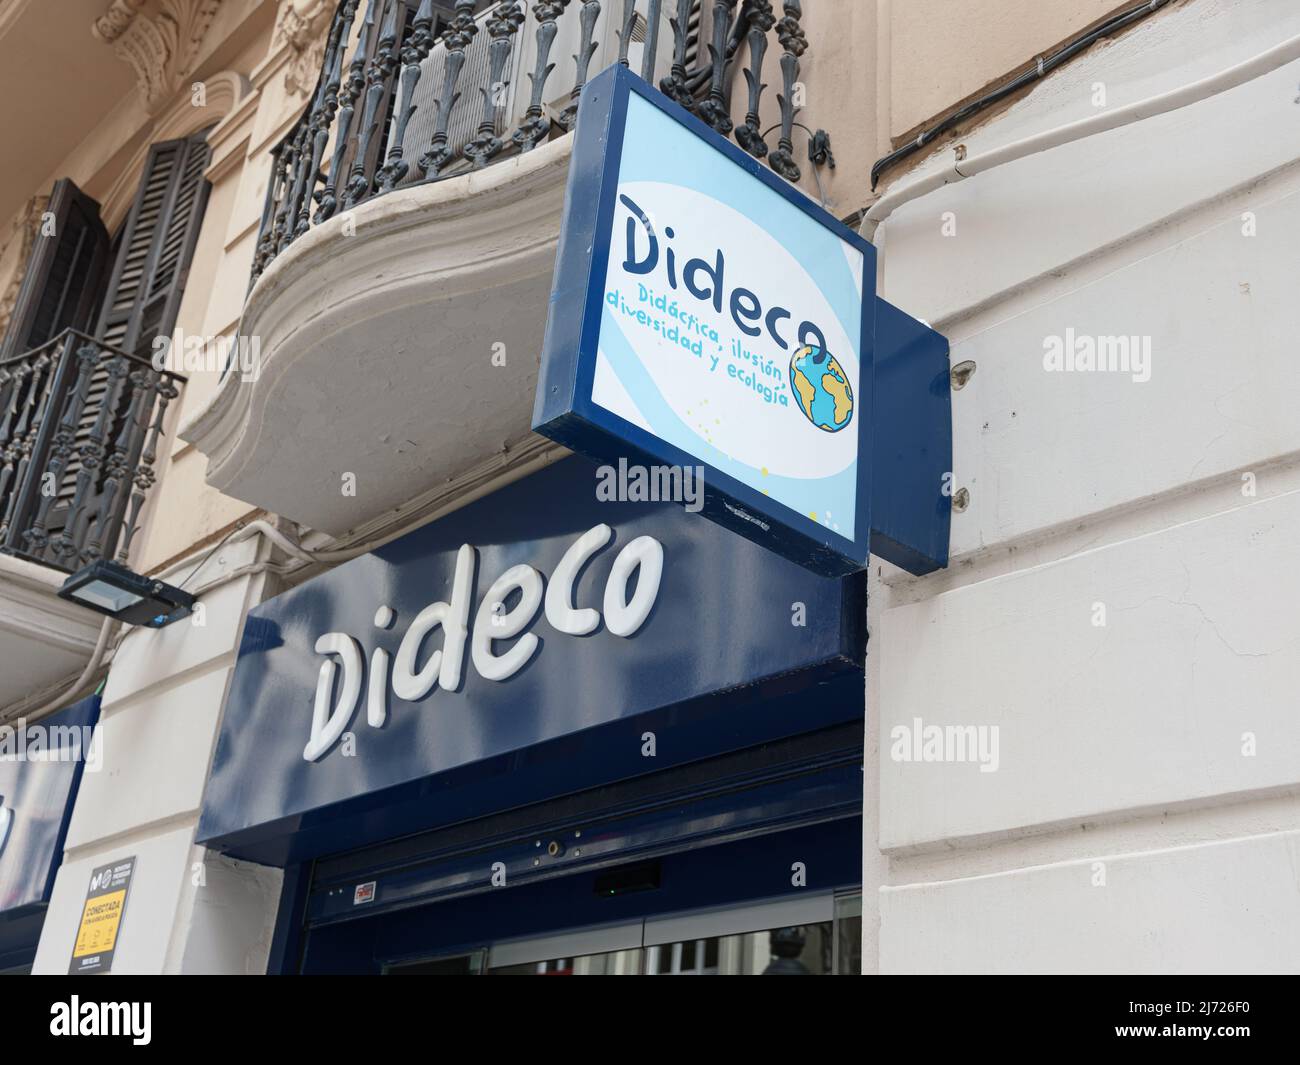 VALENCIA, SPAIN - MAY 05, 2022: Dideco is a Spanish educational toy store chain Stock Photo